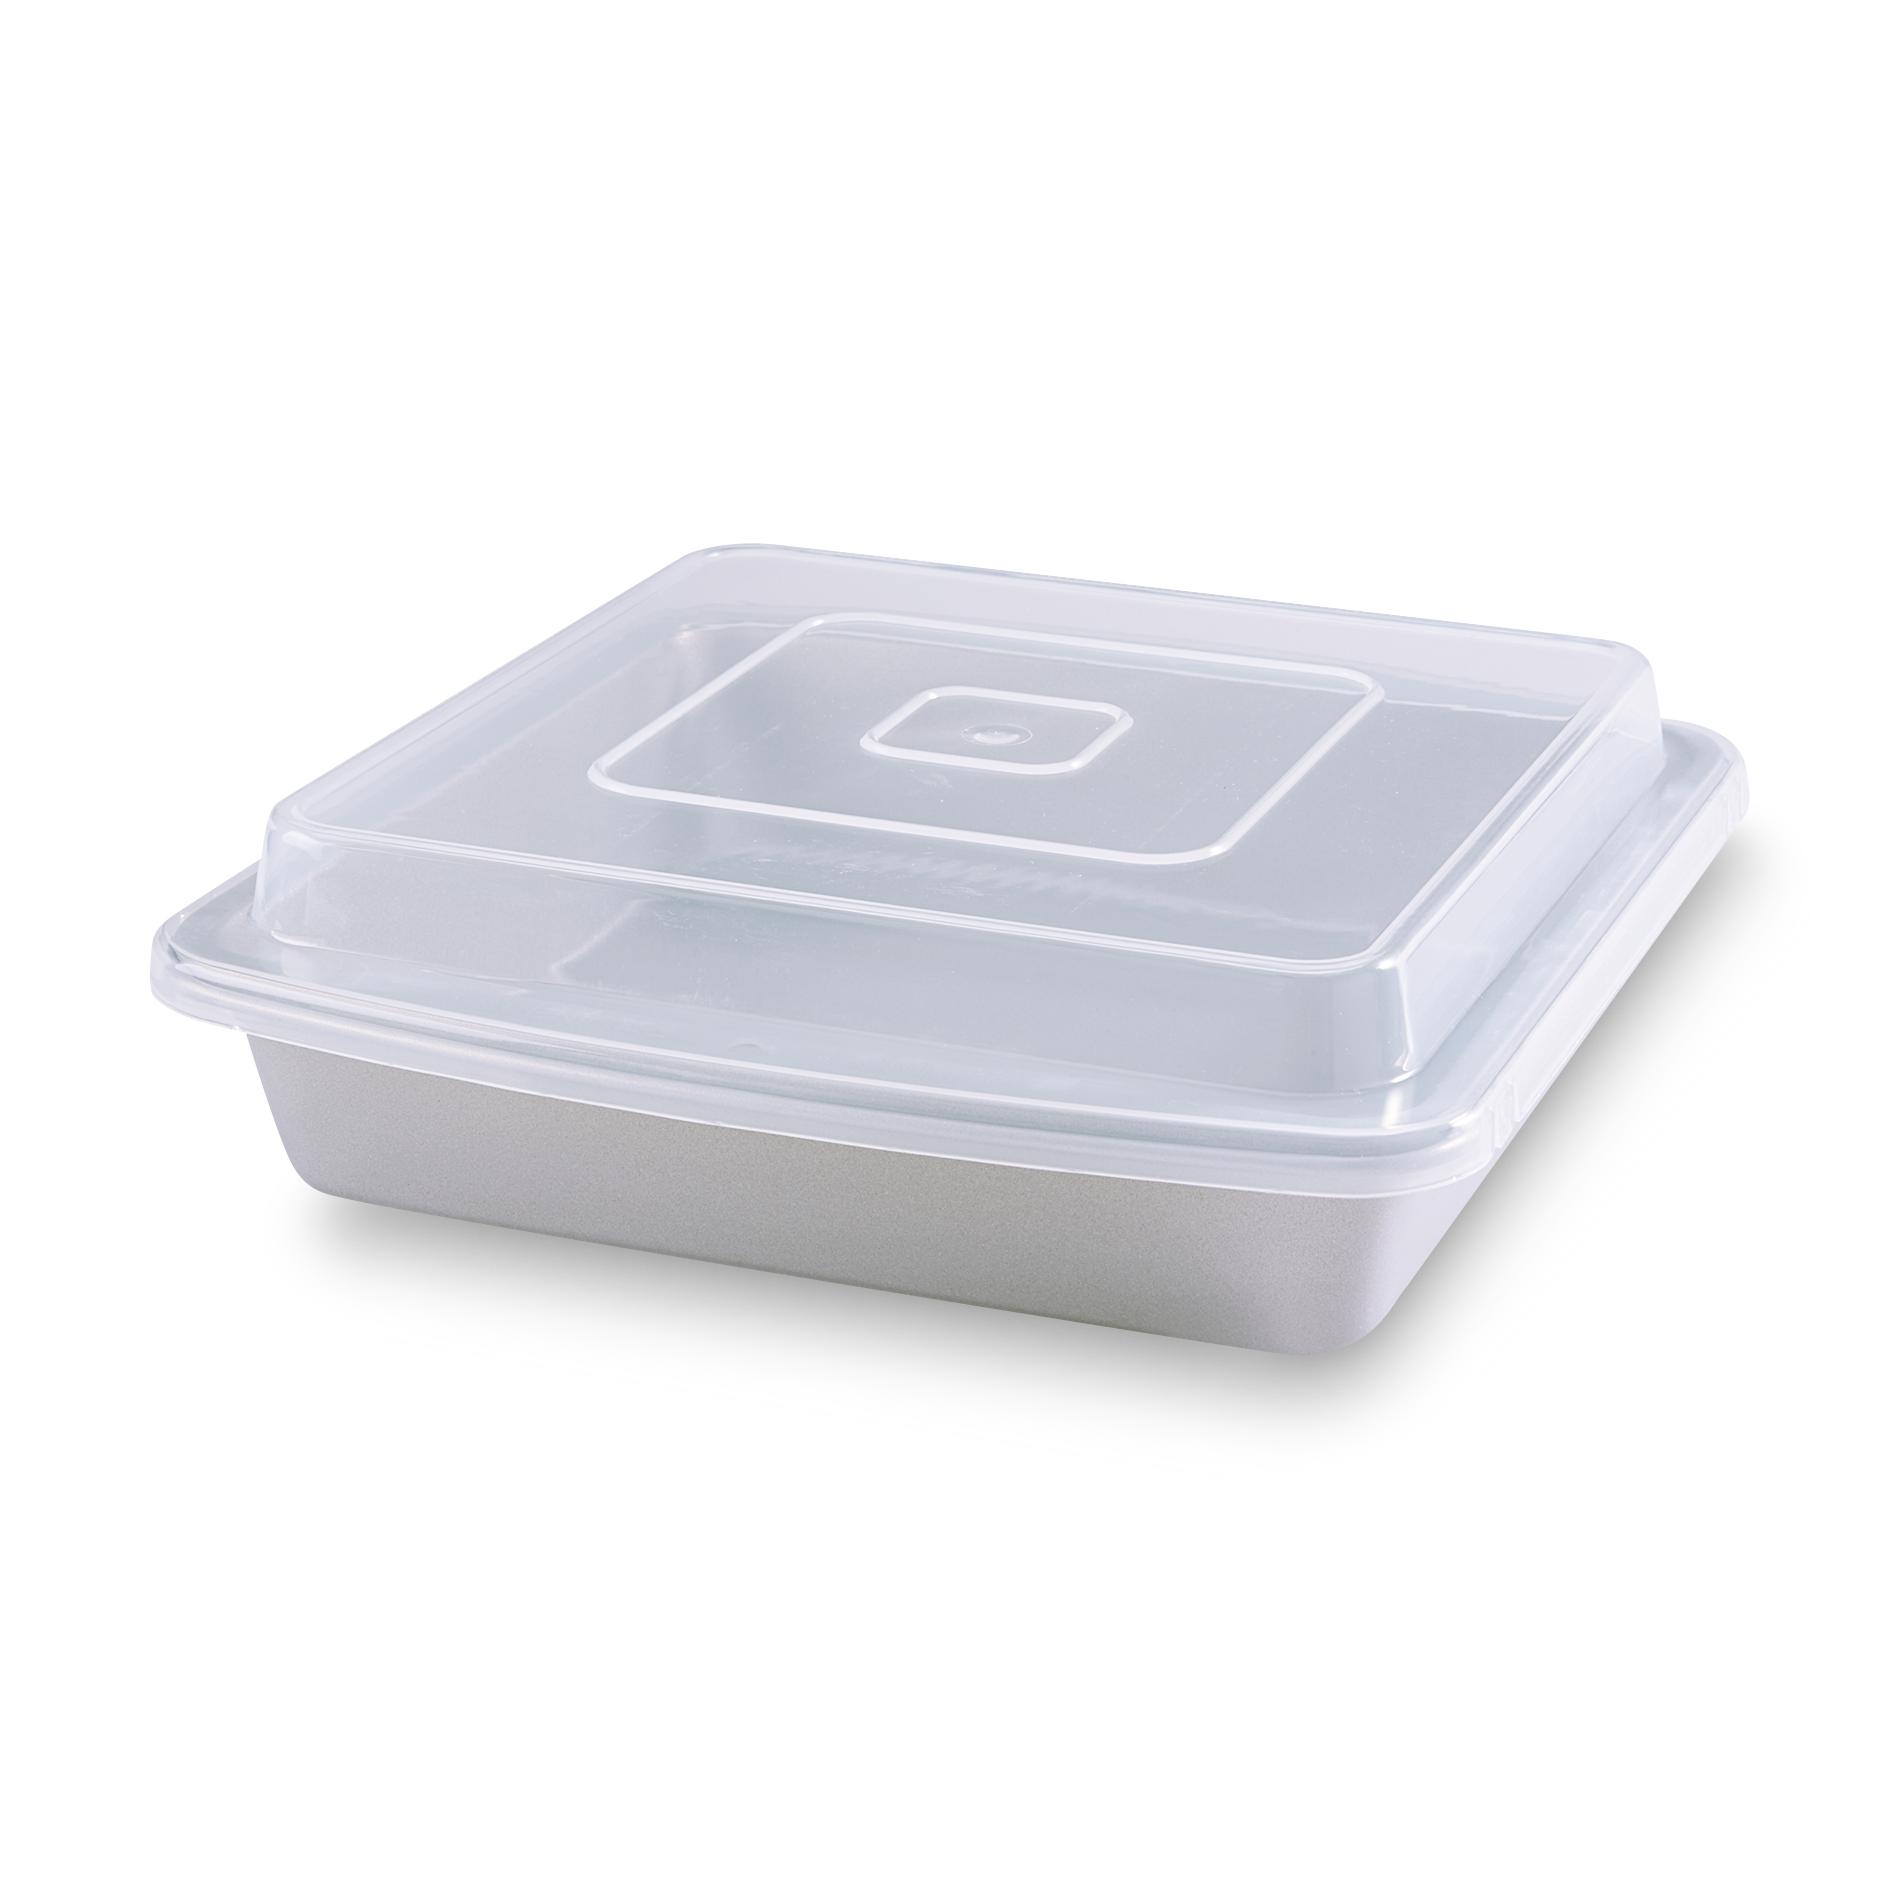 Essential Home 9-Inch Square Nonstick Cake Pan & Cover